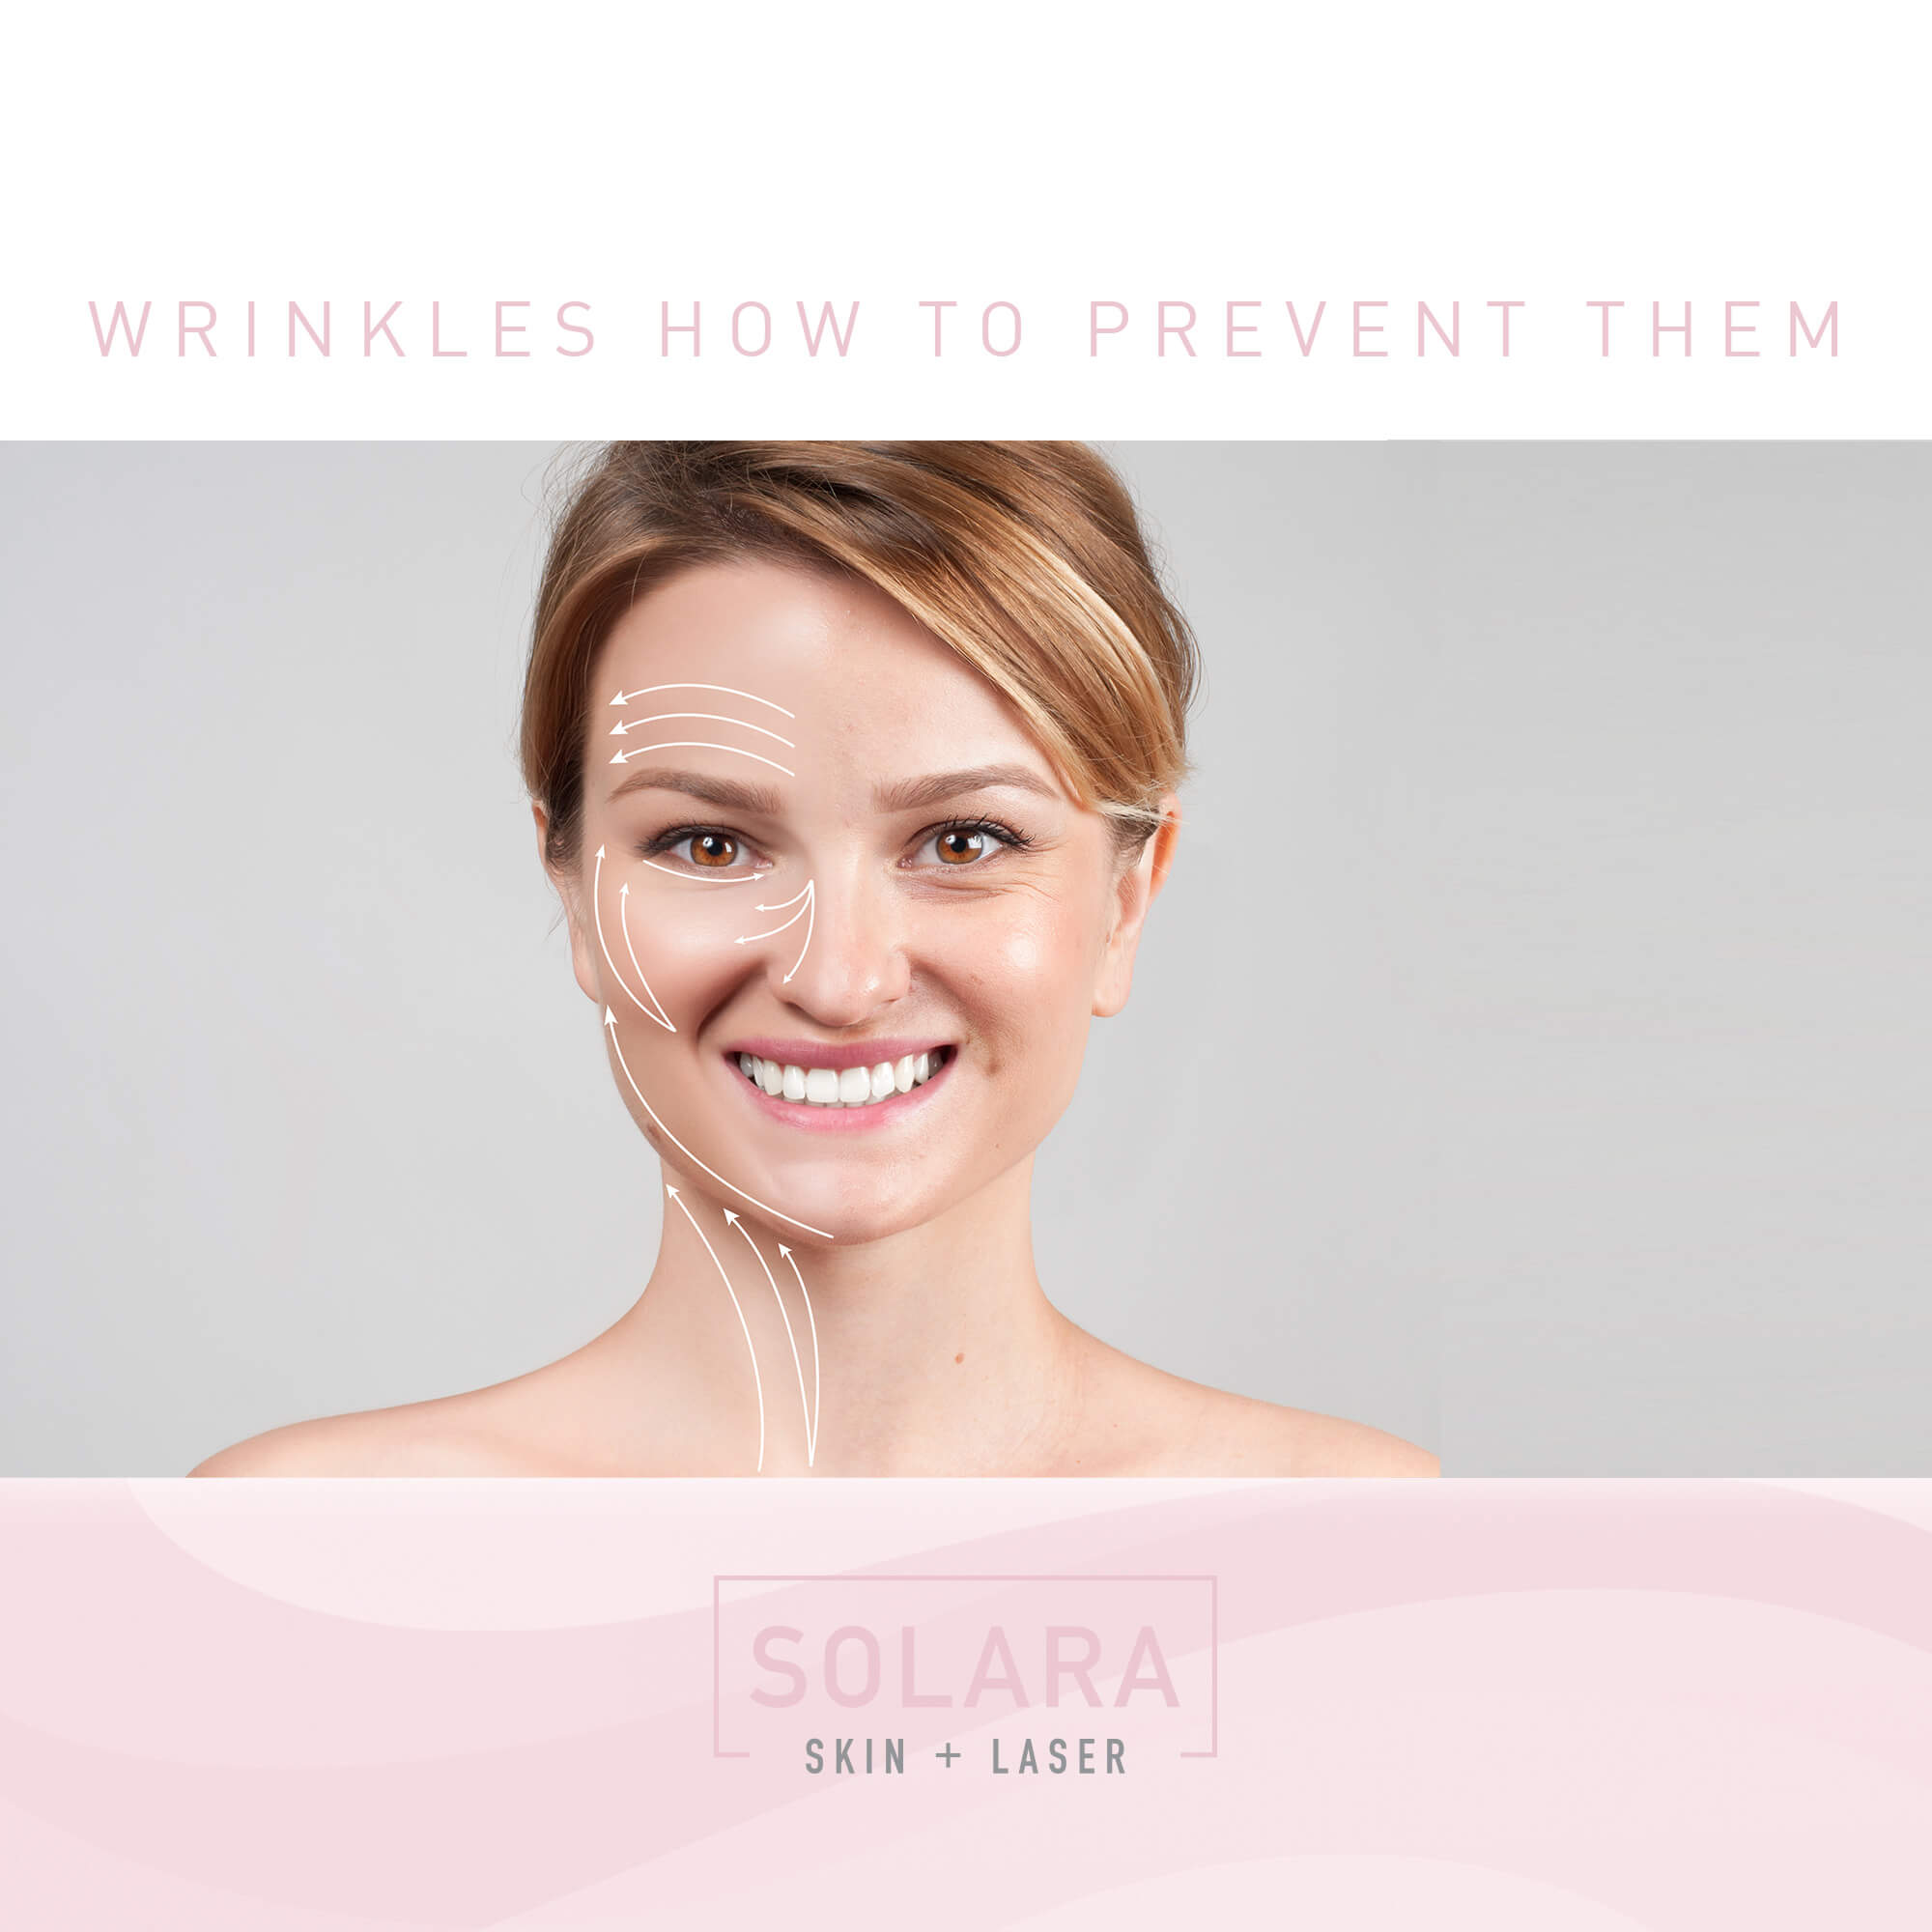 How to Prevent Wrinkles